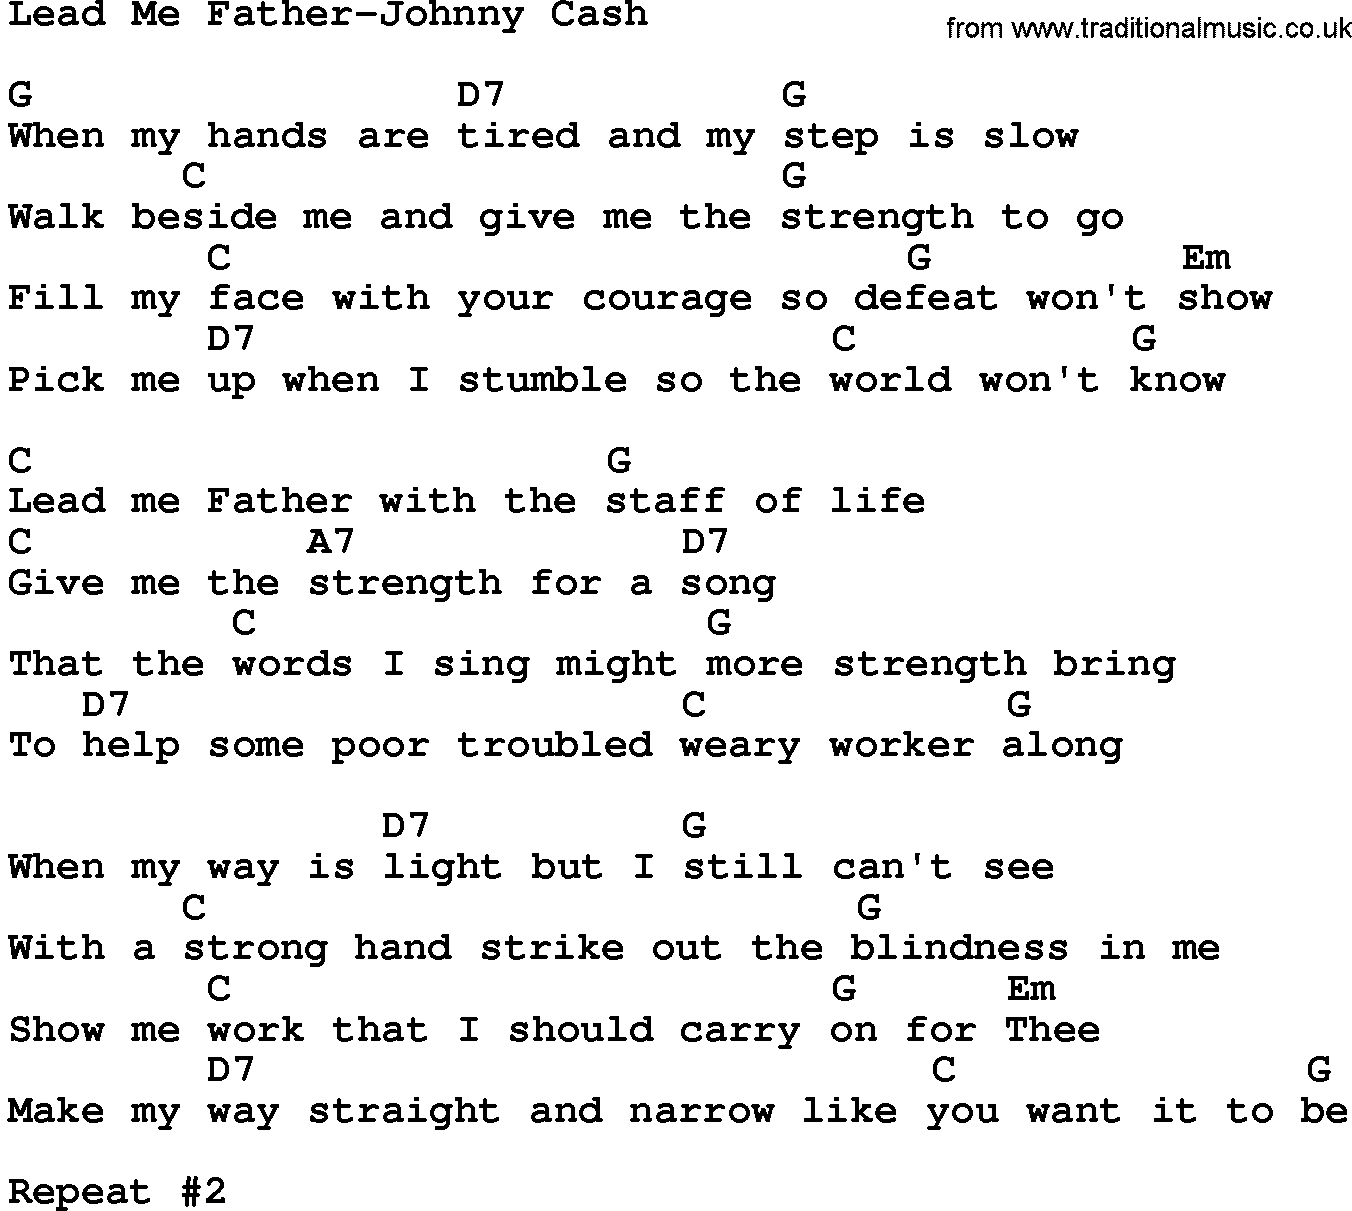 Country music song: Lead Me Father-Johnny Cash lyrics and chords